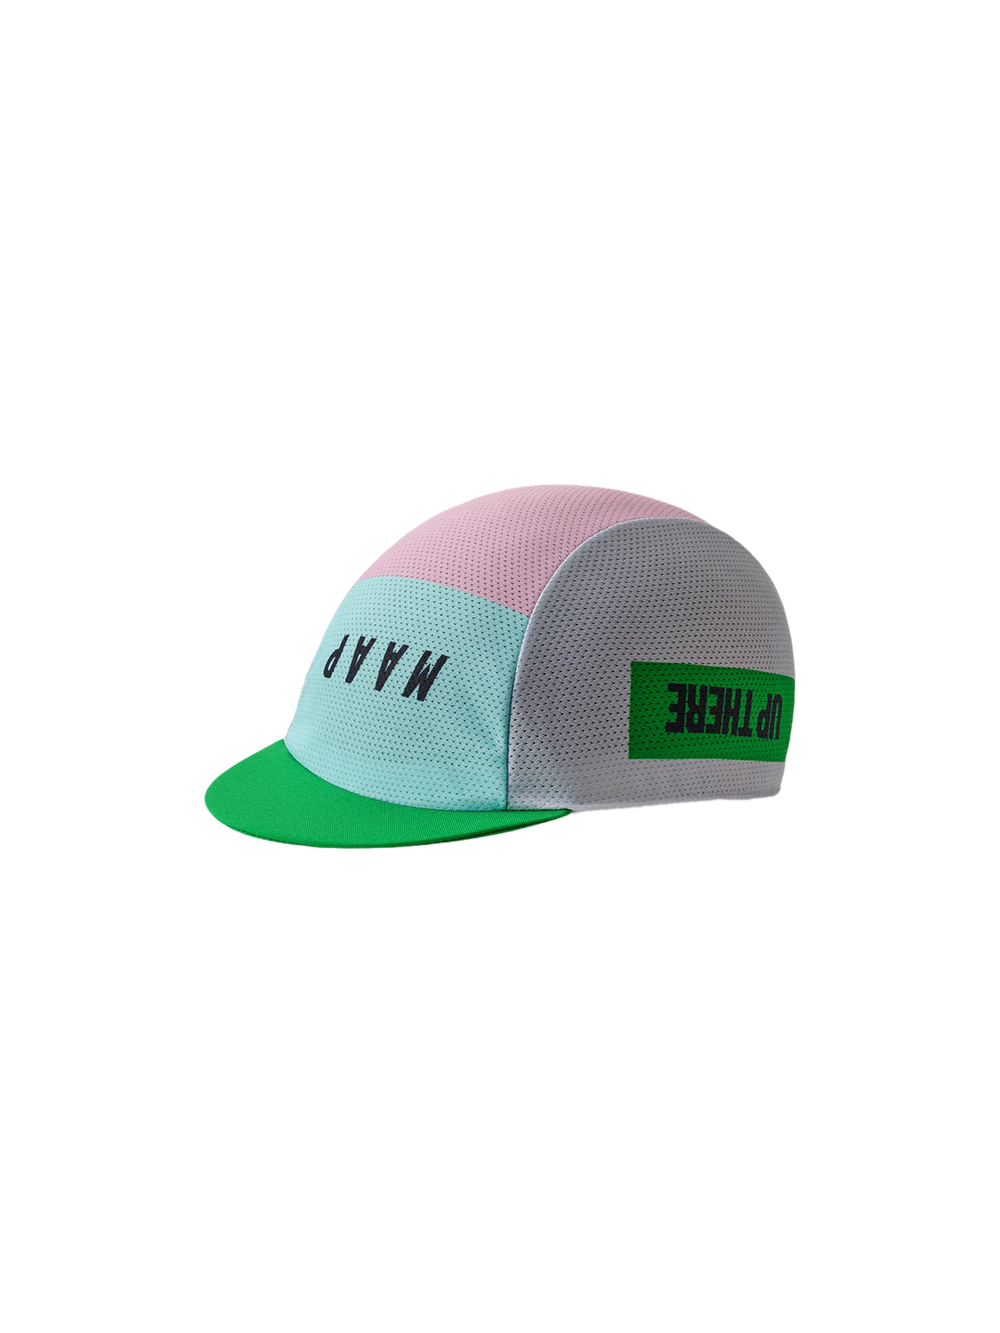 Product Image for MAAP x UP THERE Mesh Cap